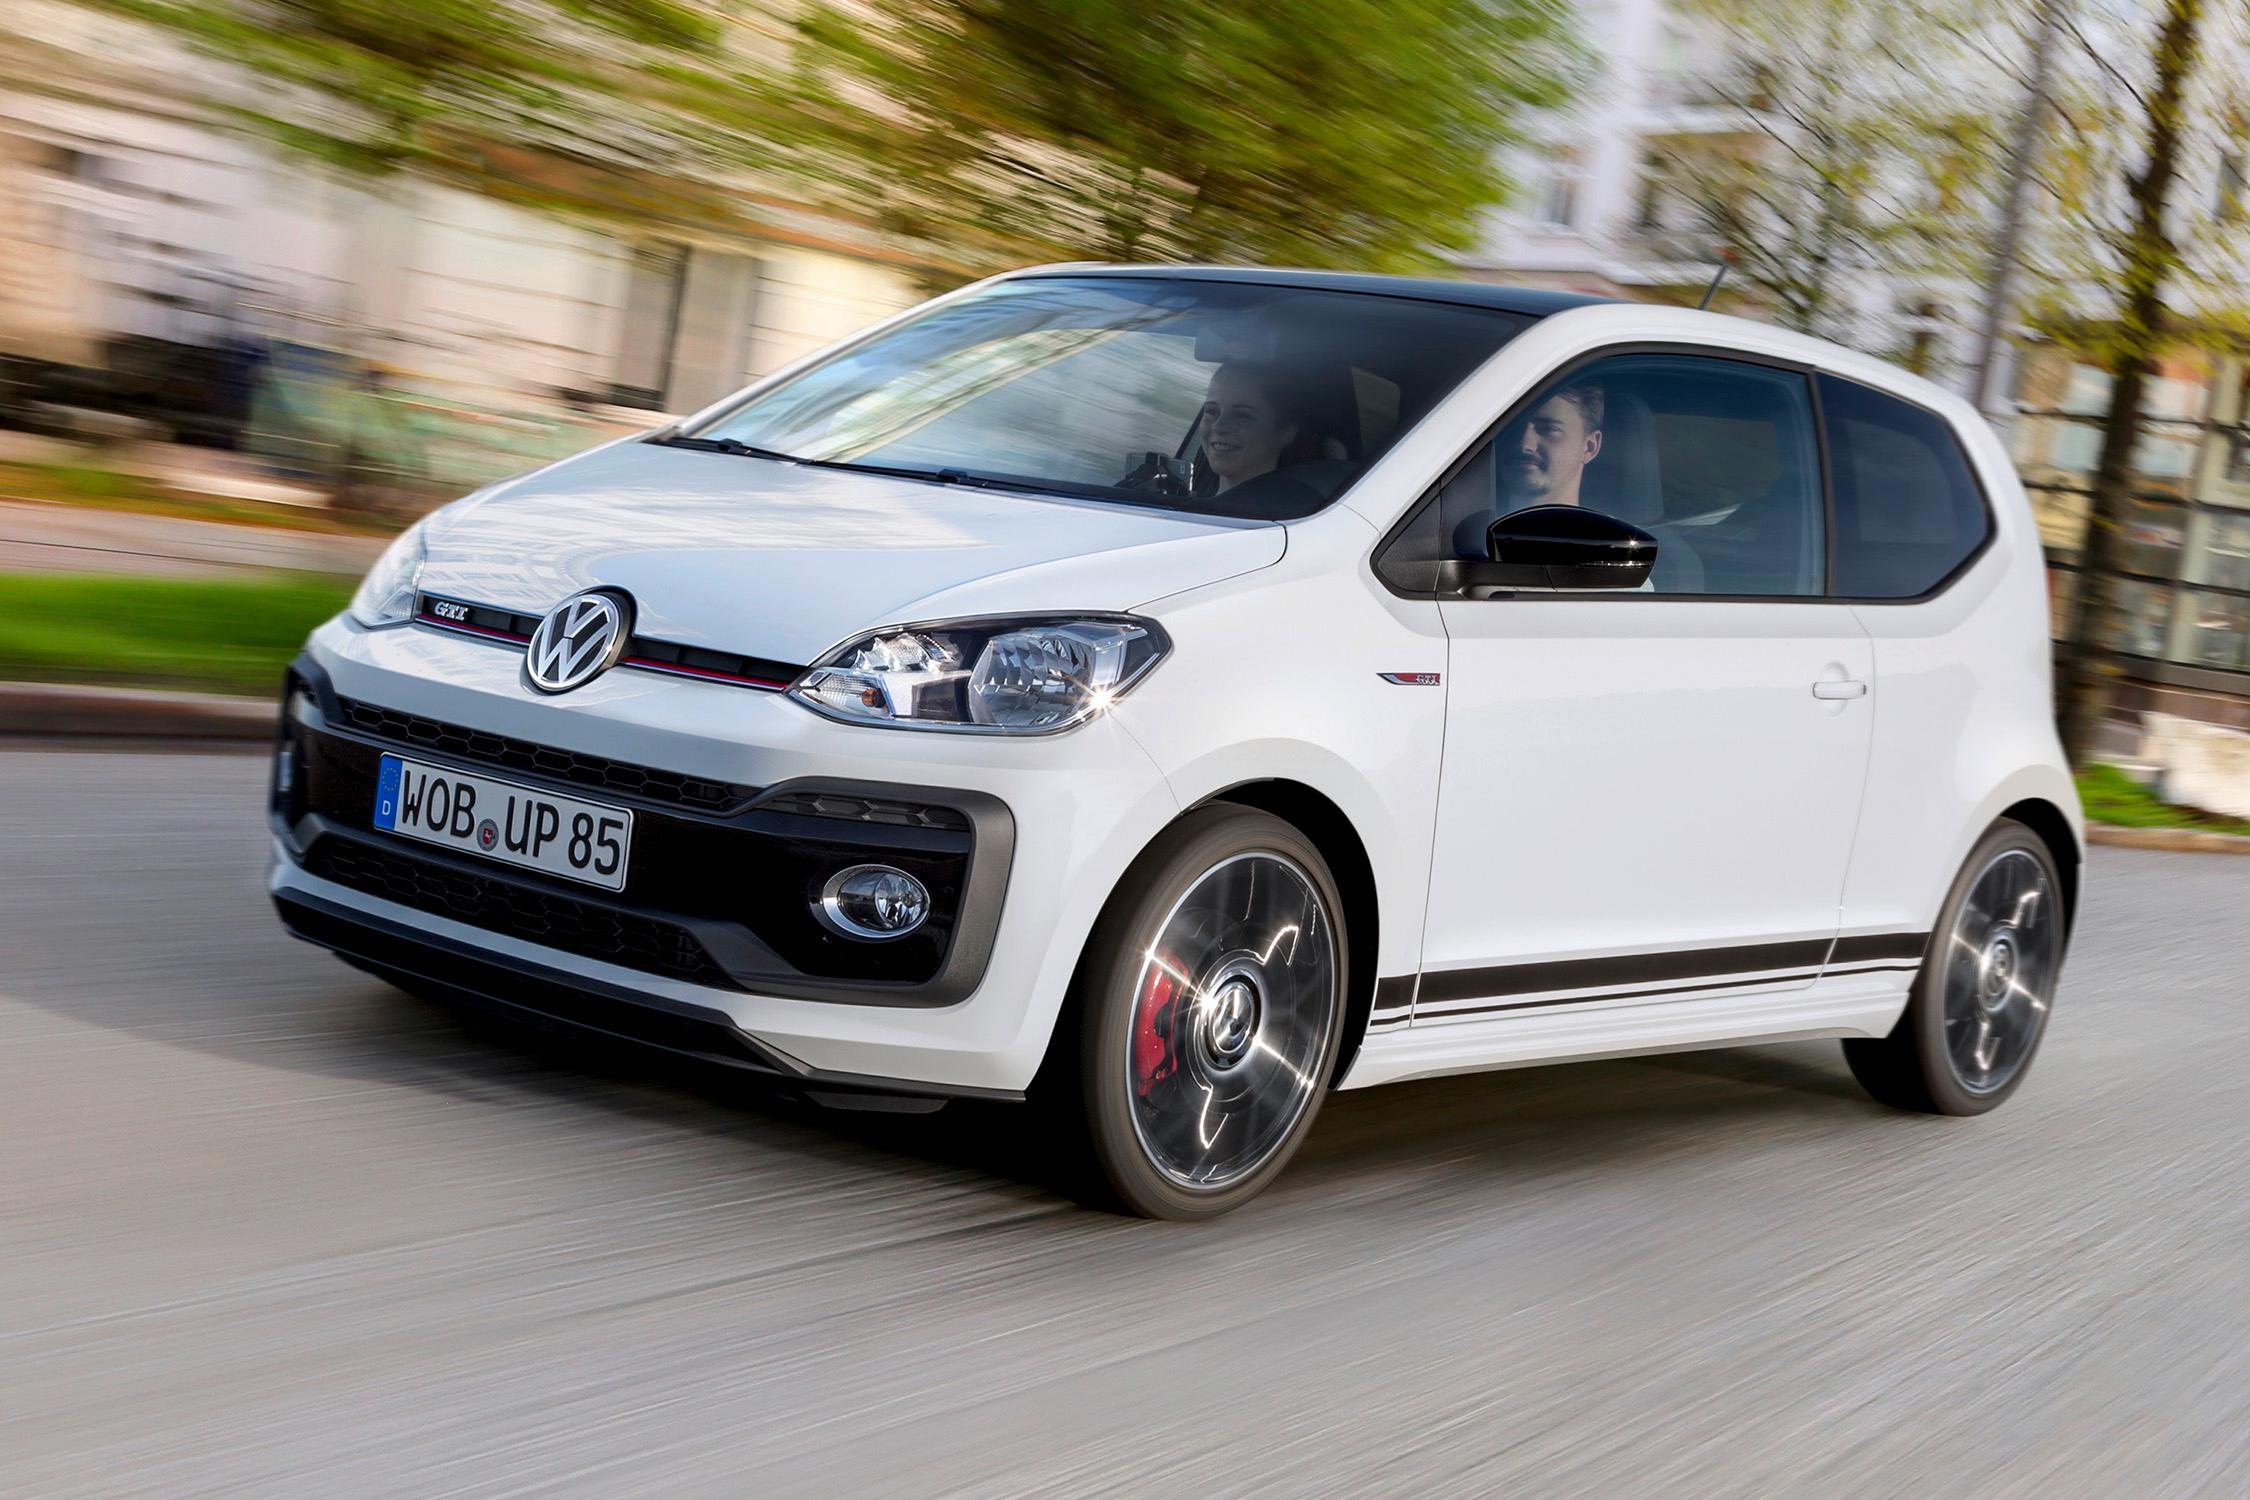 The cars of The Grand Tour season 2 - Volkswagen Up! GTI It’s not all multi-turbo supercars and seven-figure remakes at The Grand Tour, you know. There’s still room for a good, honest, hot hatchback, especially if it’s one that tips its hat to the godfather of fast hatchery, the Mk 1 Golf GTI. And with its modest power output, compact size and unflashy equipment levels, that’s what the Up! GTI does, as James May discovers on our track.